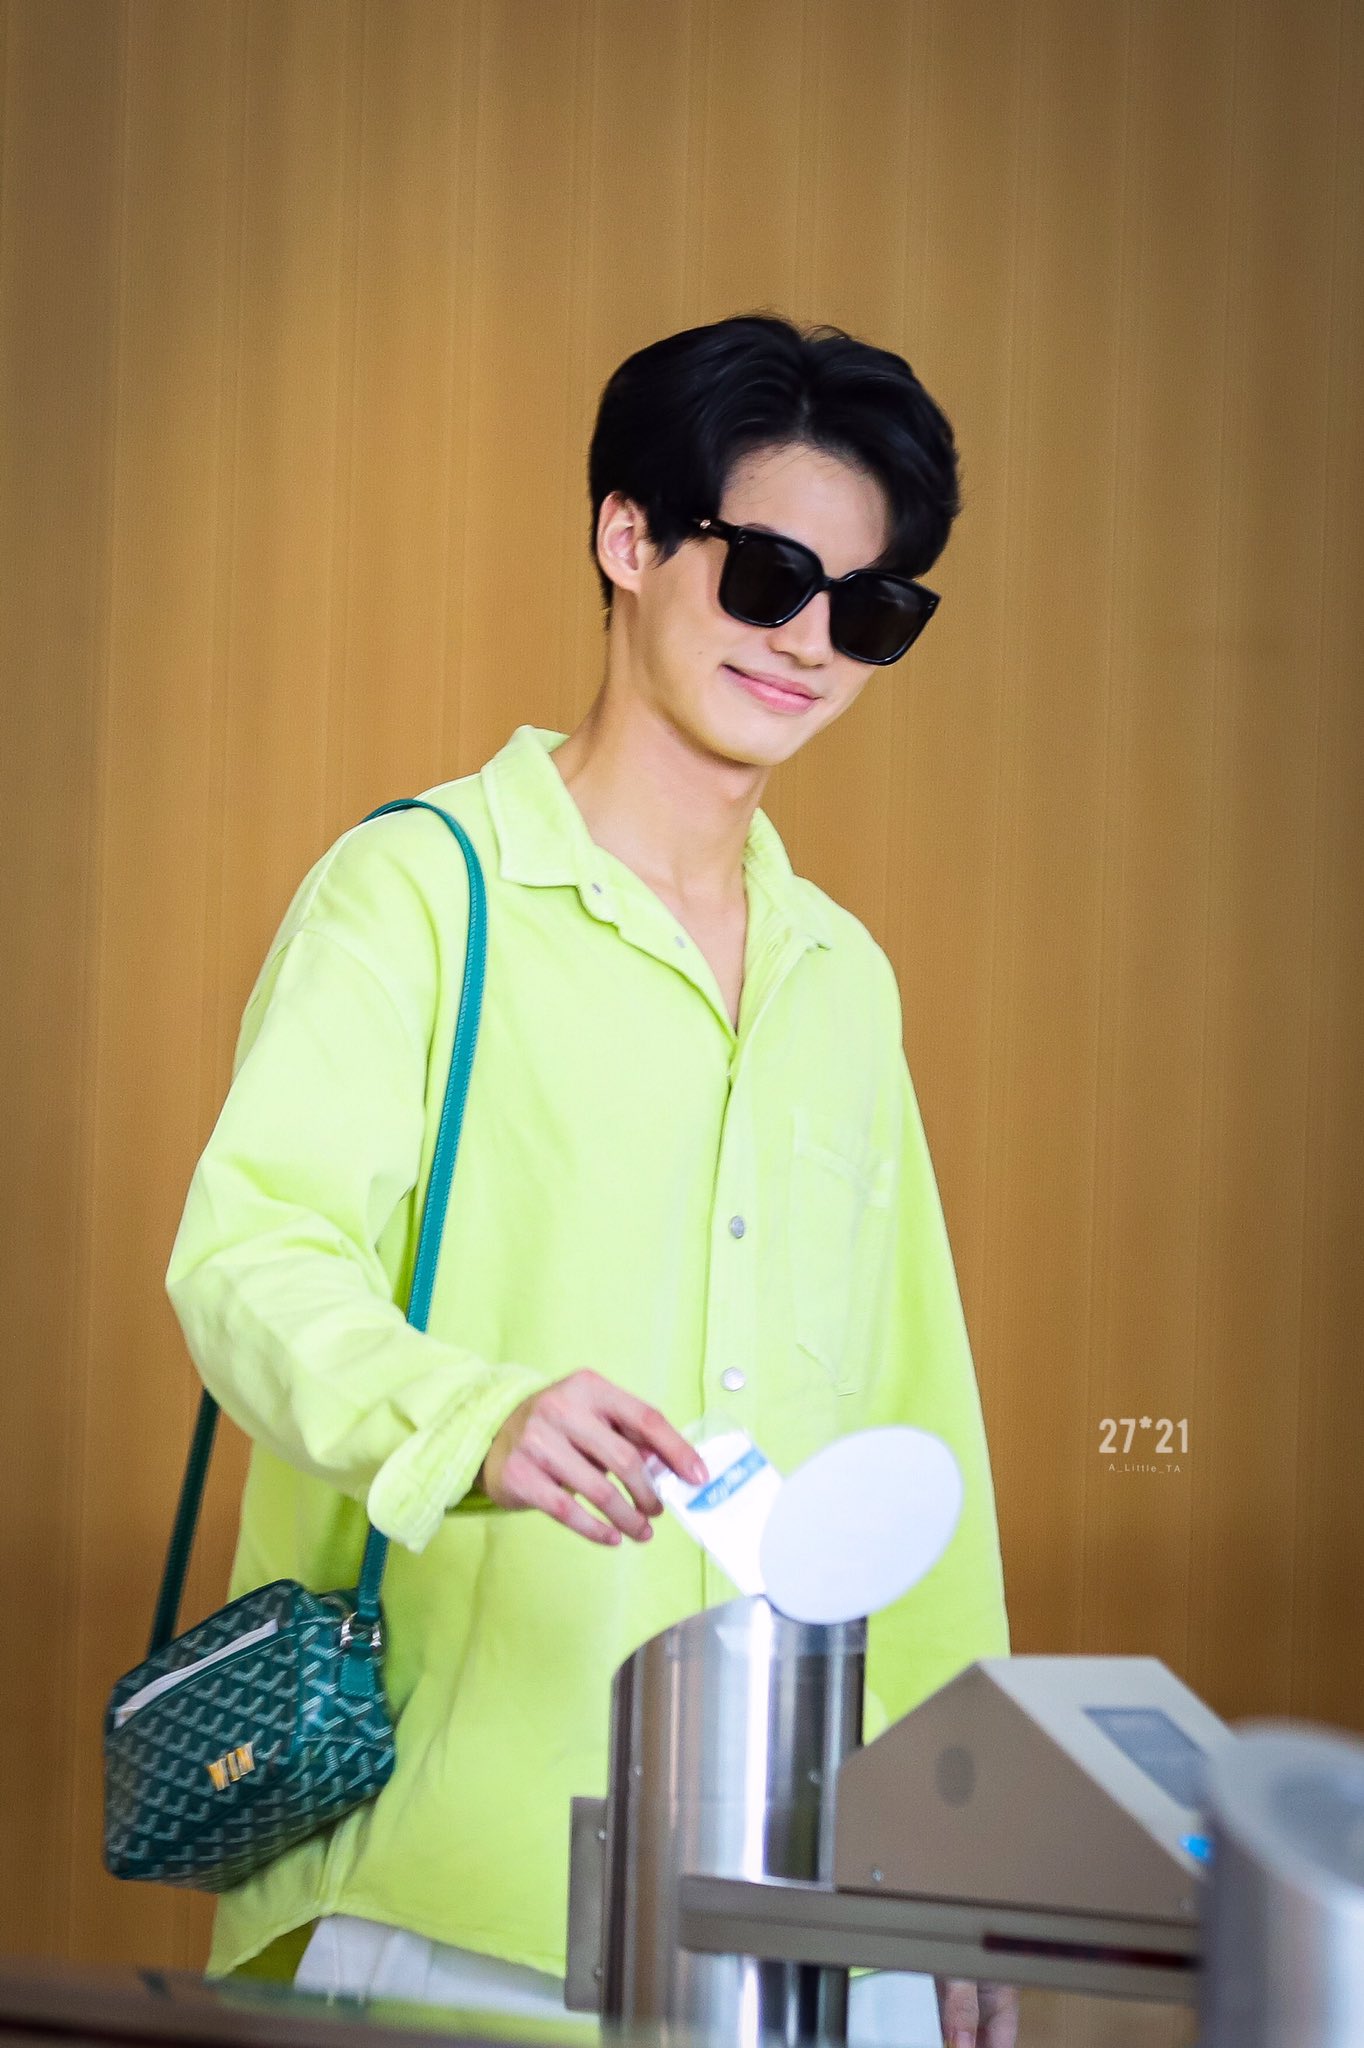 g° on X: his outfit wont be complete without the fans' gift for him, the  goyard bag 🥺 #FashionFridayxWin @winmetawin #winmetawin   / X